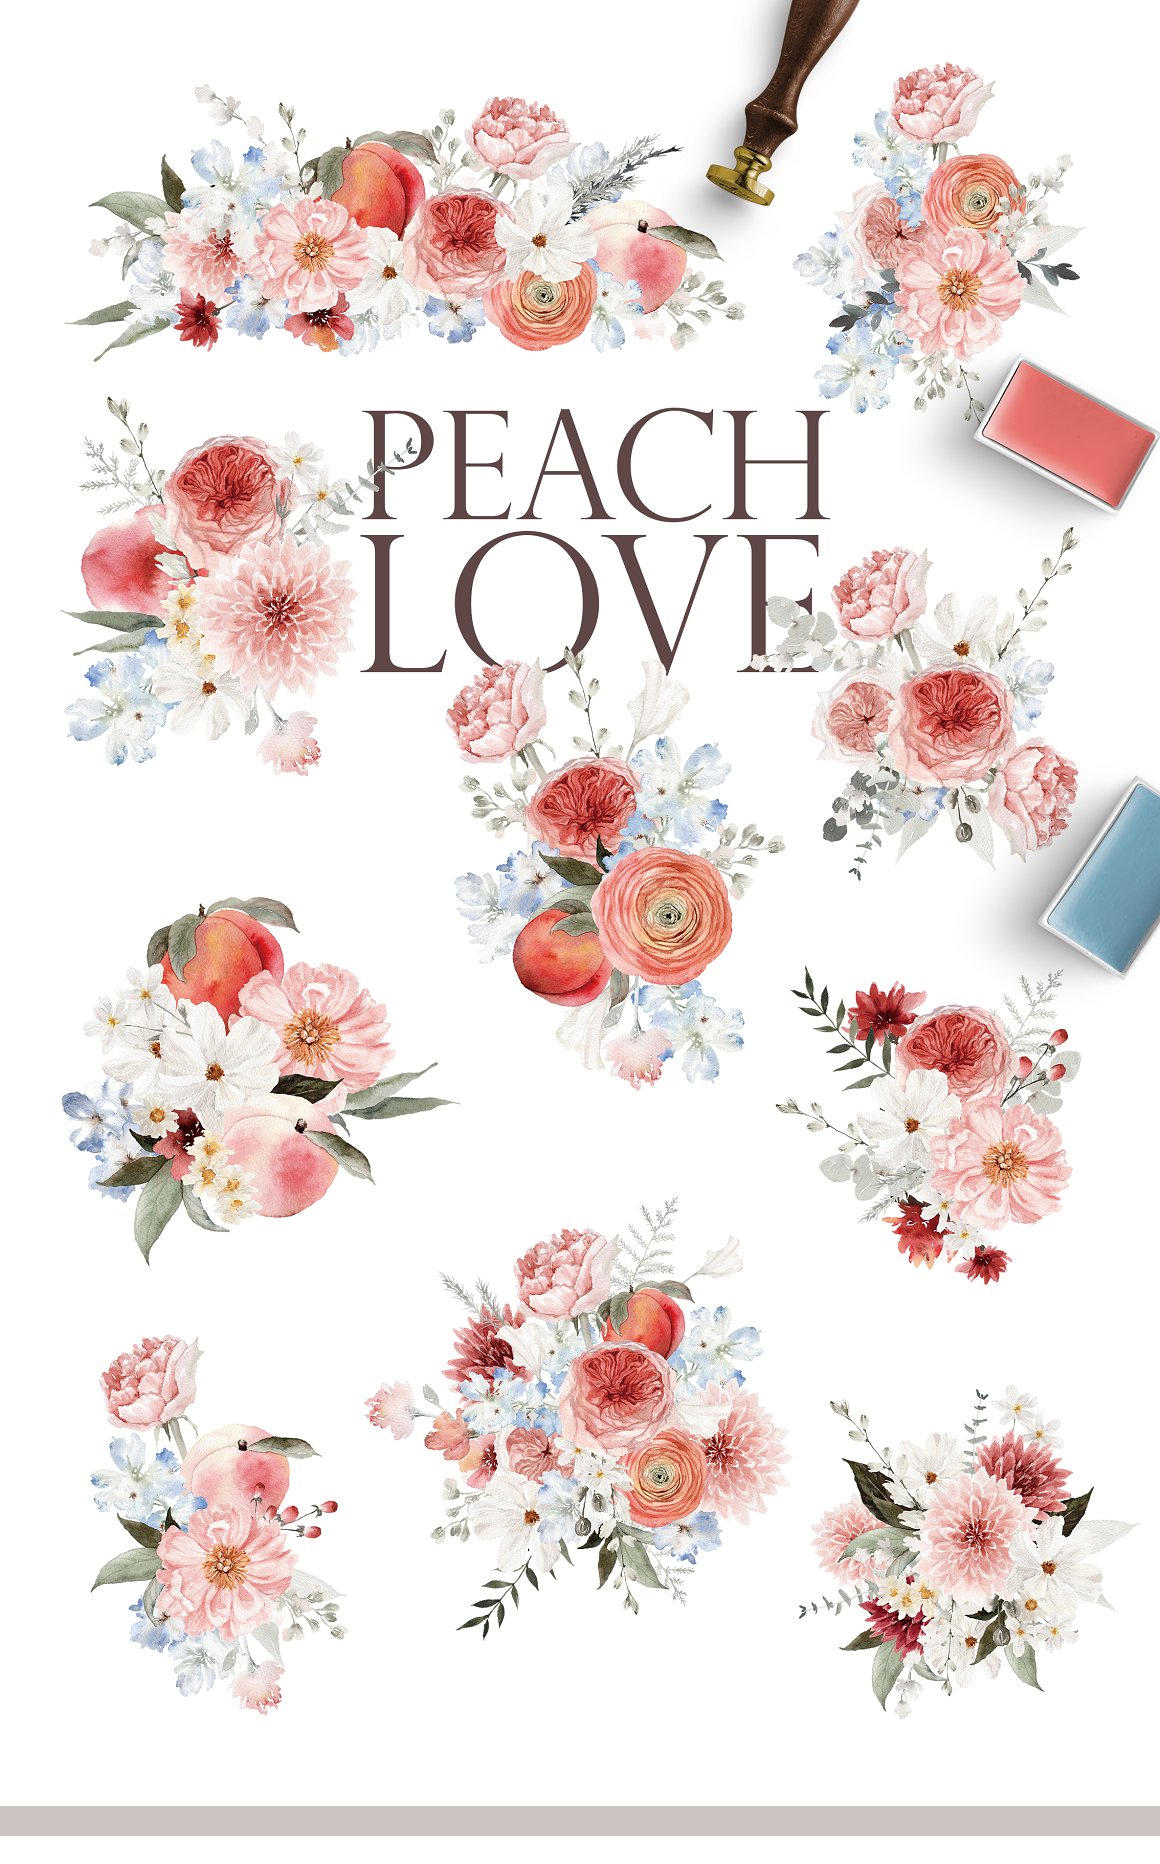 Collection of 10 different floral and peach bouquets on a white background.